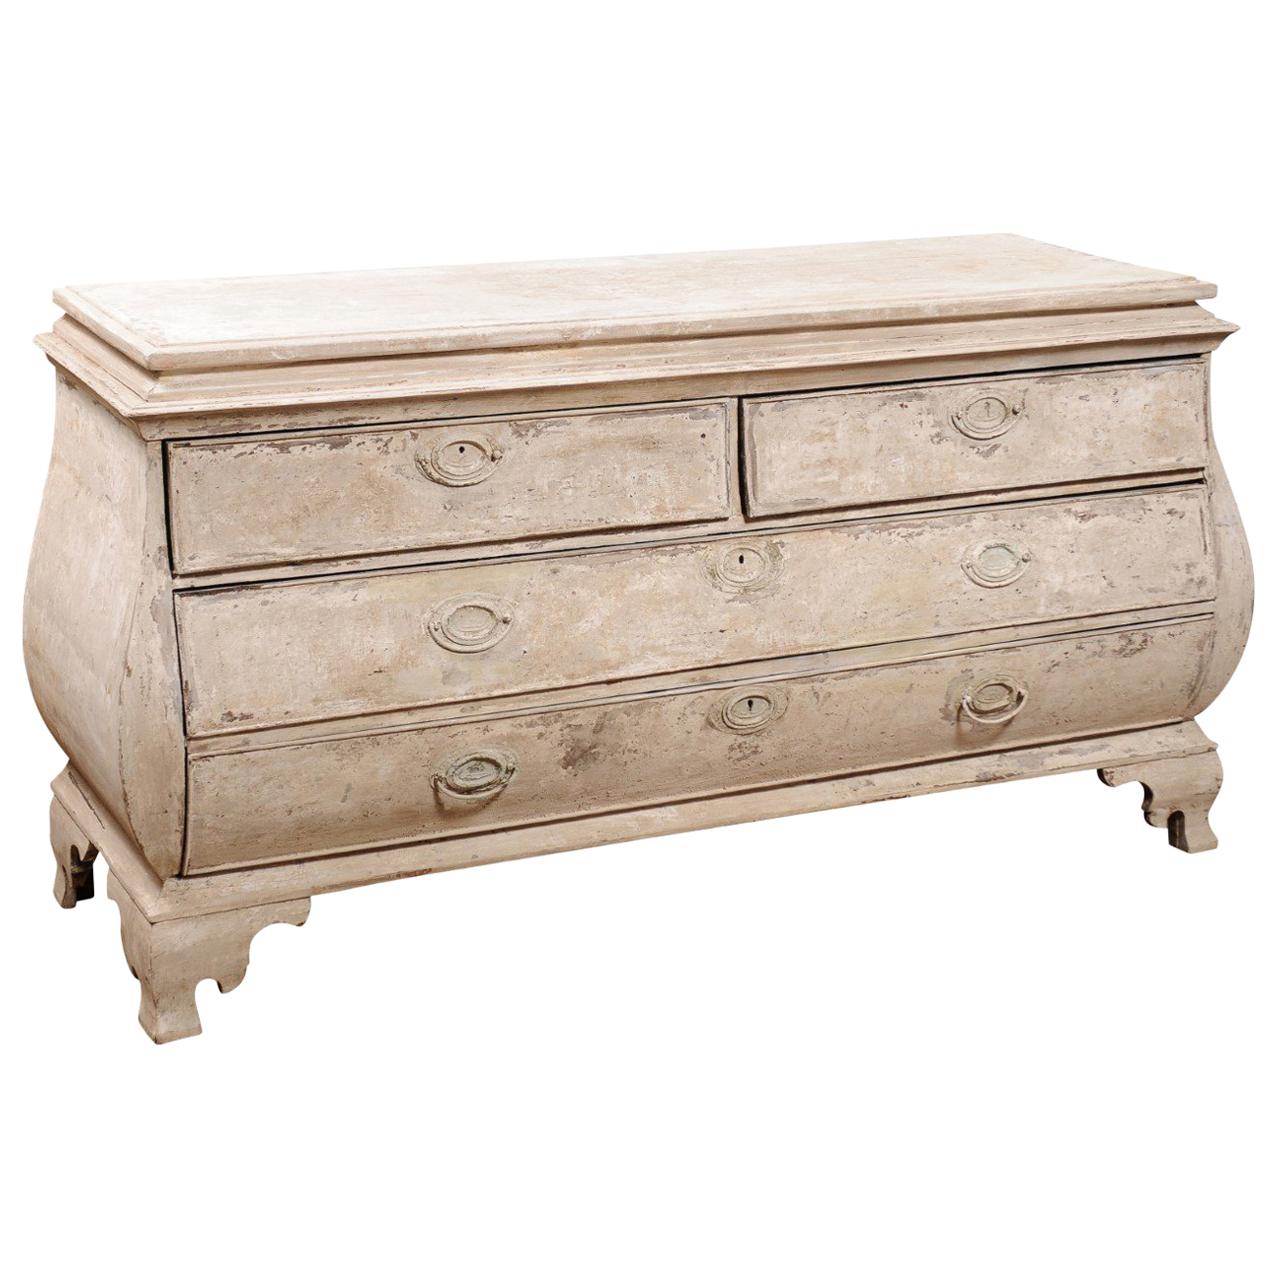 French Painted Rococo Style Bombé Four-Drawer Chest with Ogee Bracket Feet